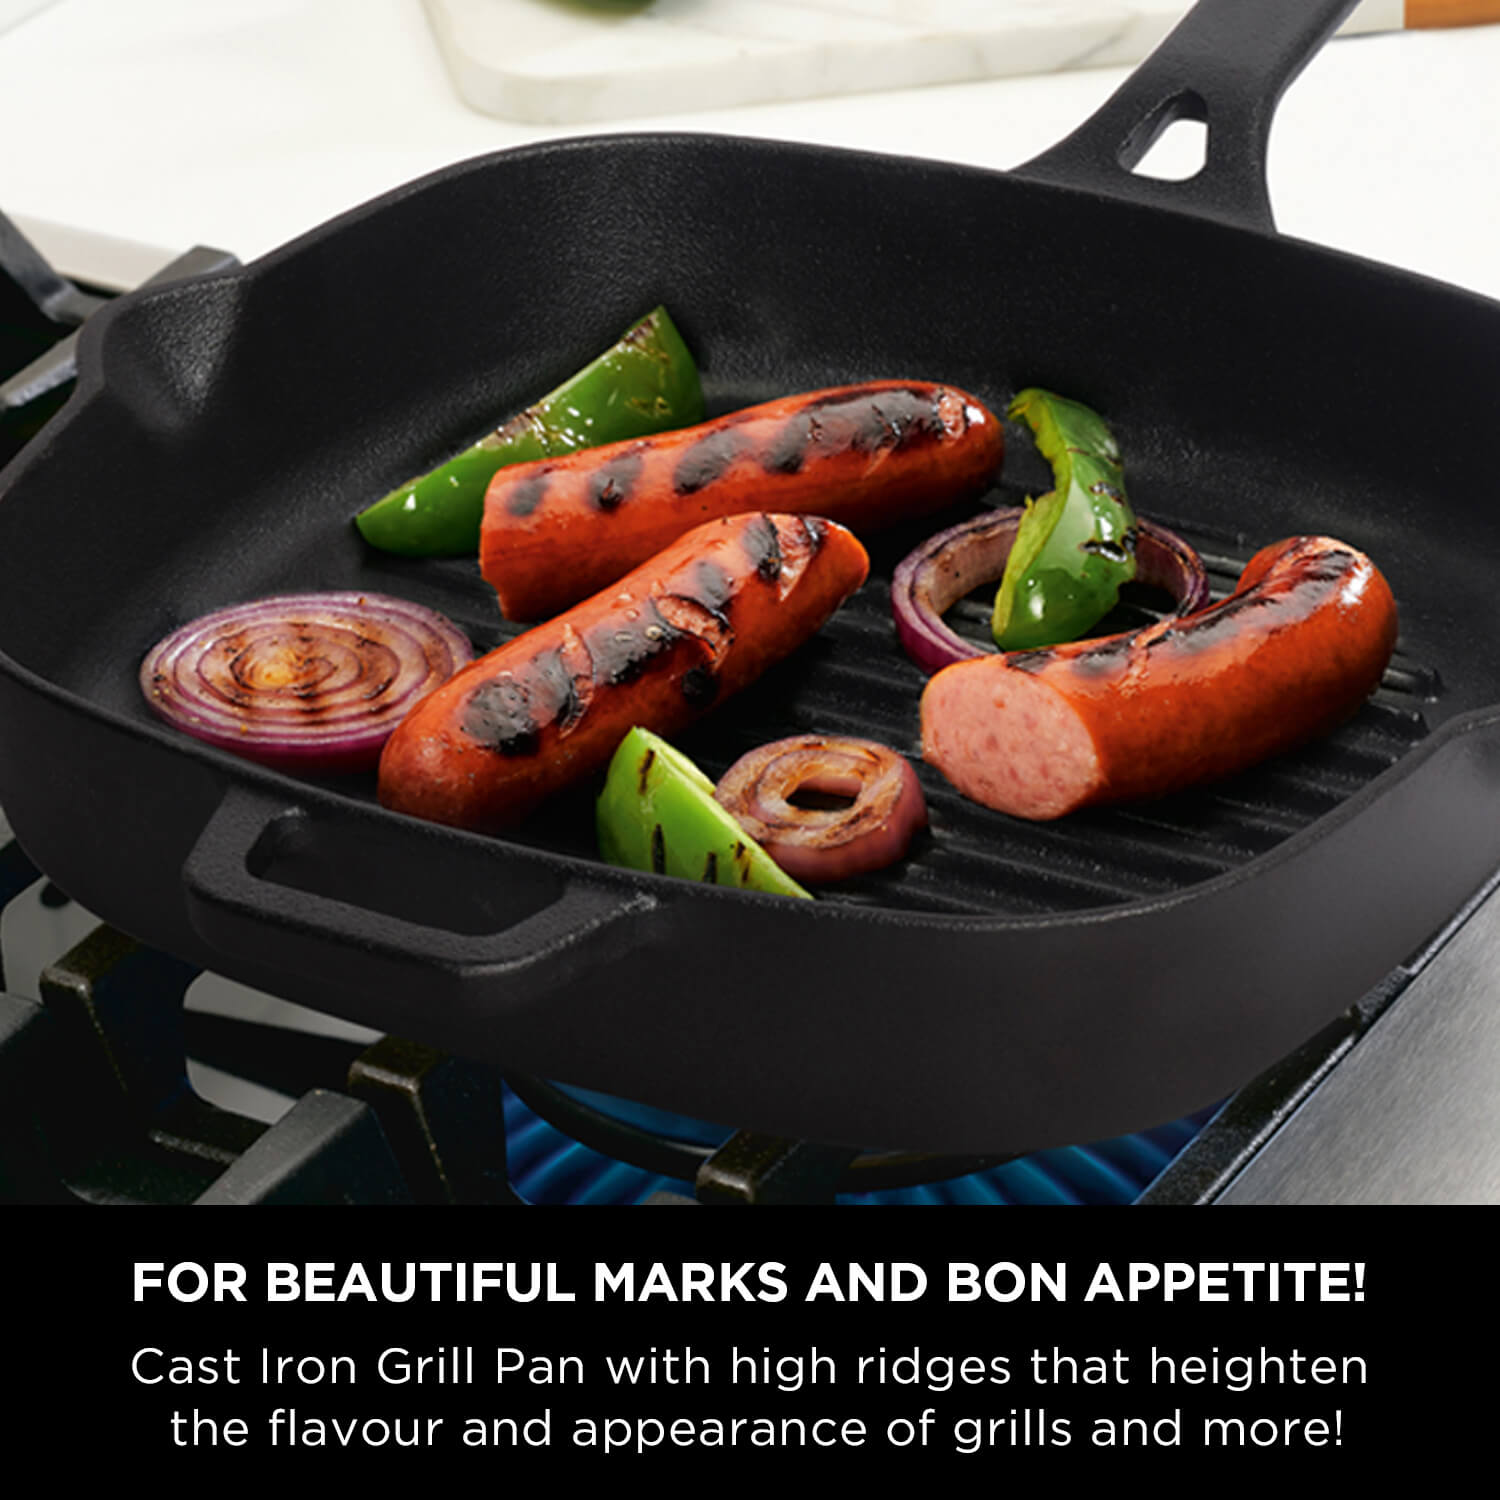 Meyer Pre-Seasoned Cast Iron Grill Pan and Glass Grill Press set